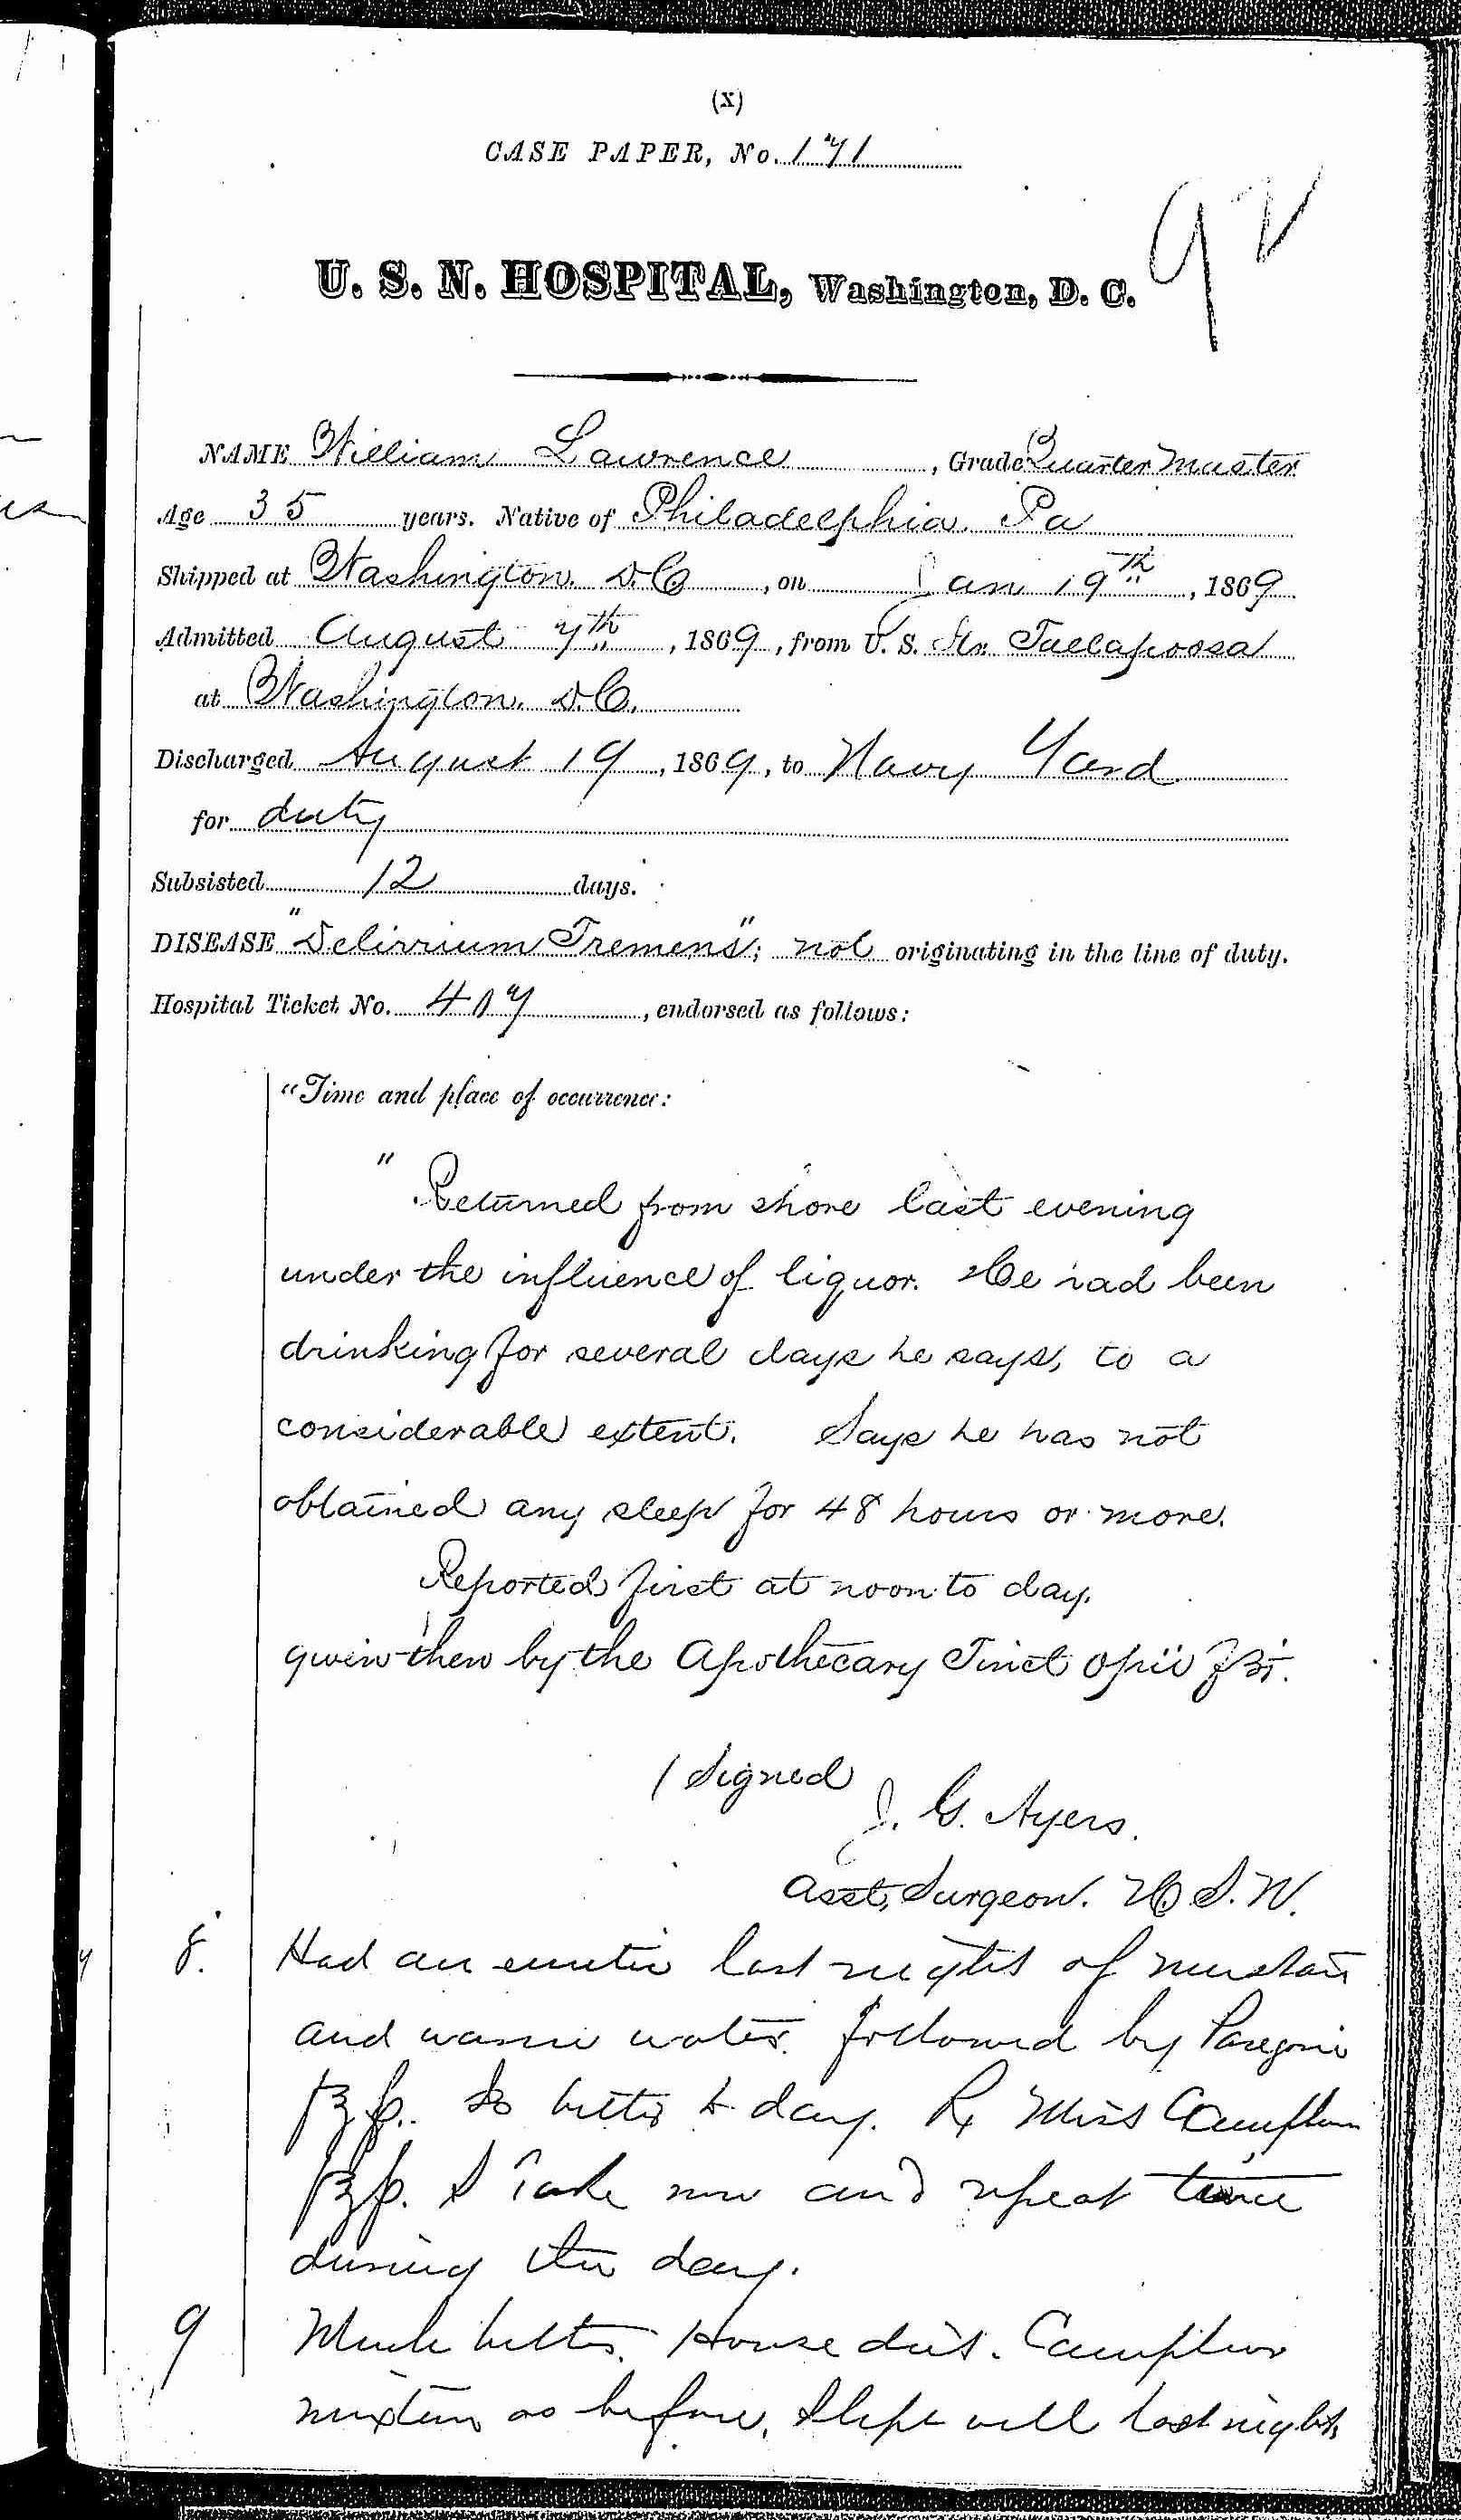 Entry for William Laurence (page 1 of 2) in the log Hospital Tickets and Case Papers - Naval Hospital - Washington, D.C. - 1868-69